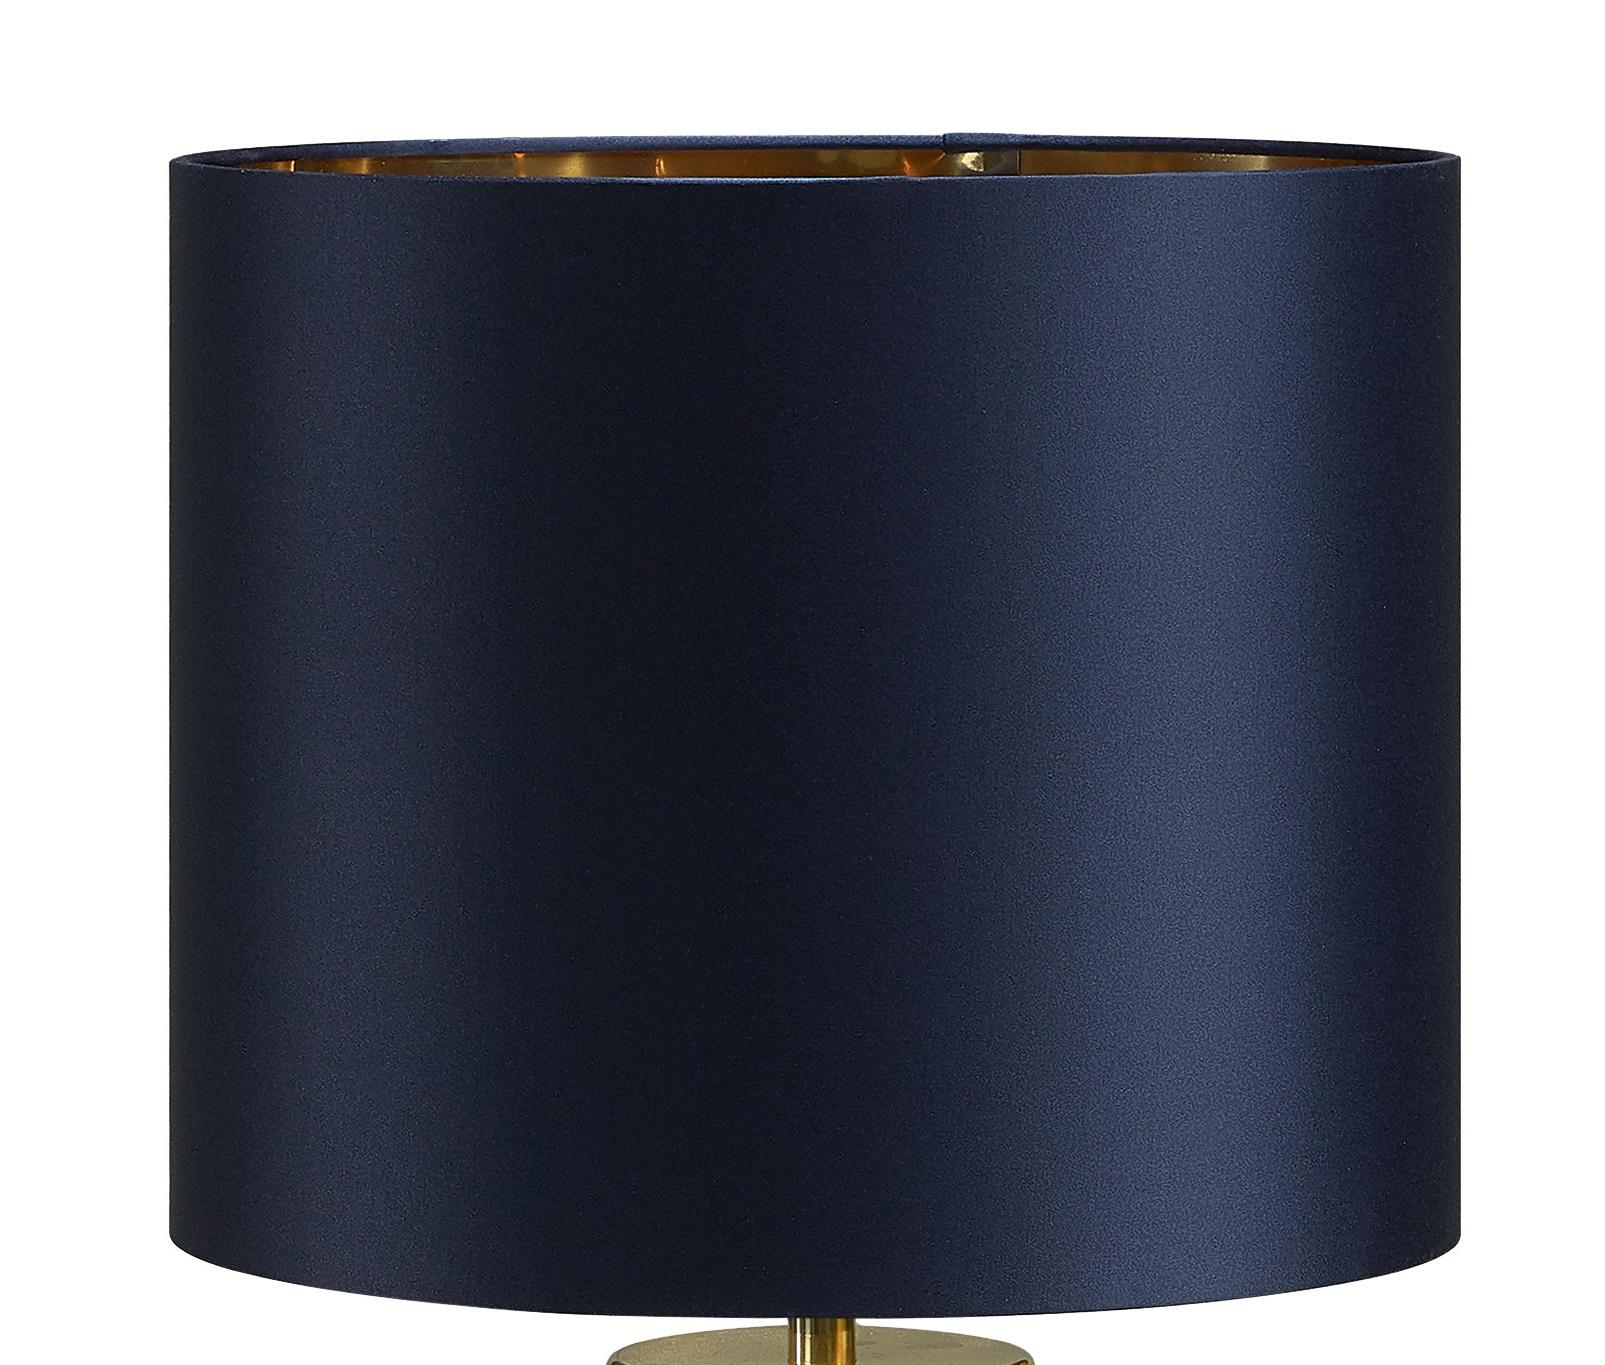 Regency Table Lamp by Memoir Essence
Dimensions: D 30 x W 30 x H 60 cm.
Materials: Polished brass, knurled tubes, white marble and satin fabric.

Besides its small size as a table lamp demands, Regency table lamp presents a carved brass junction of